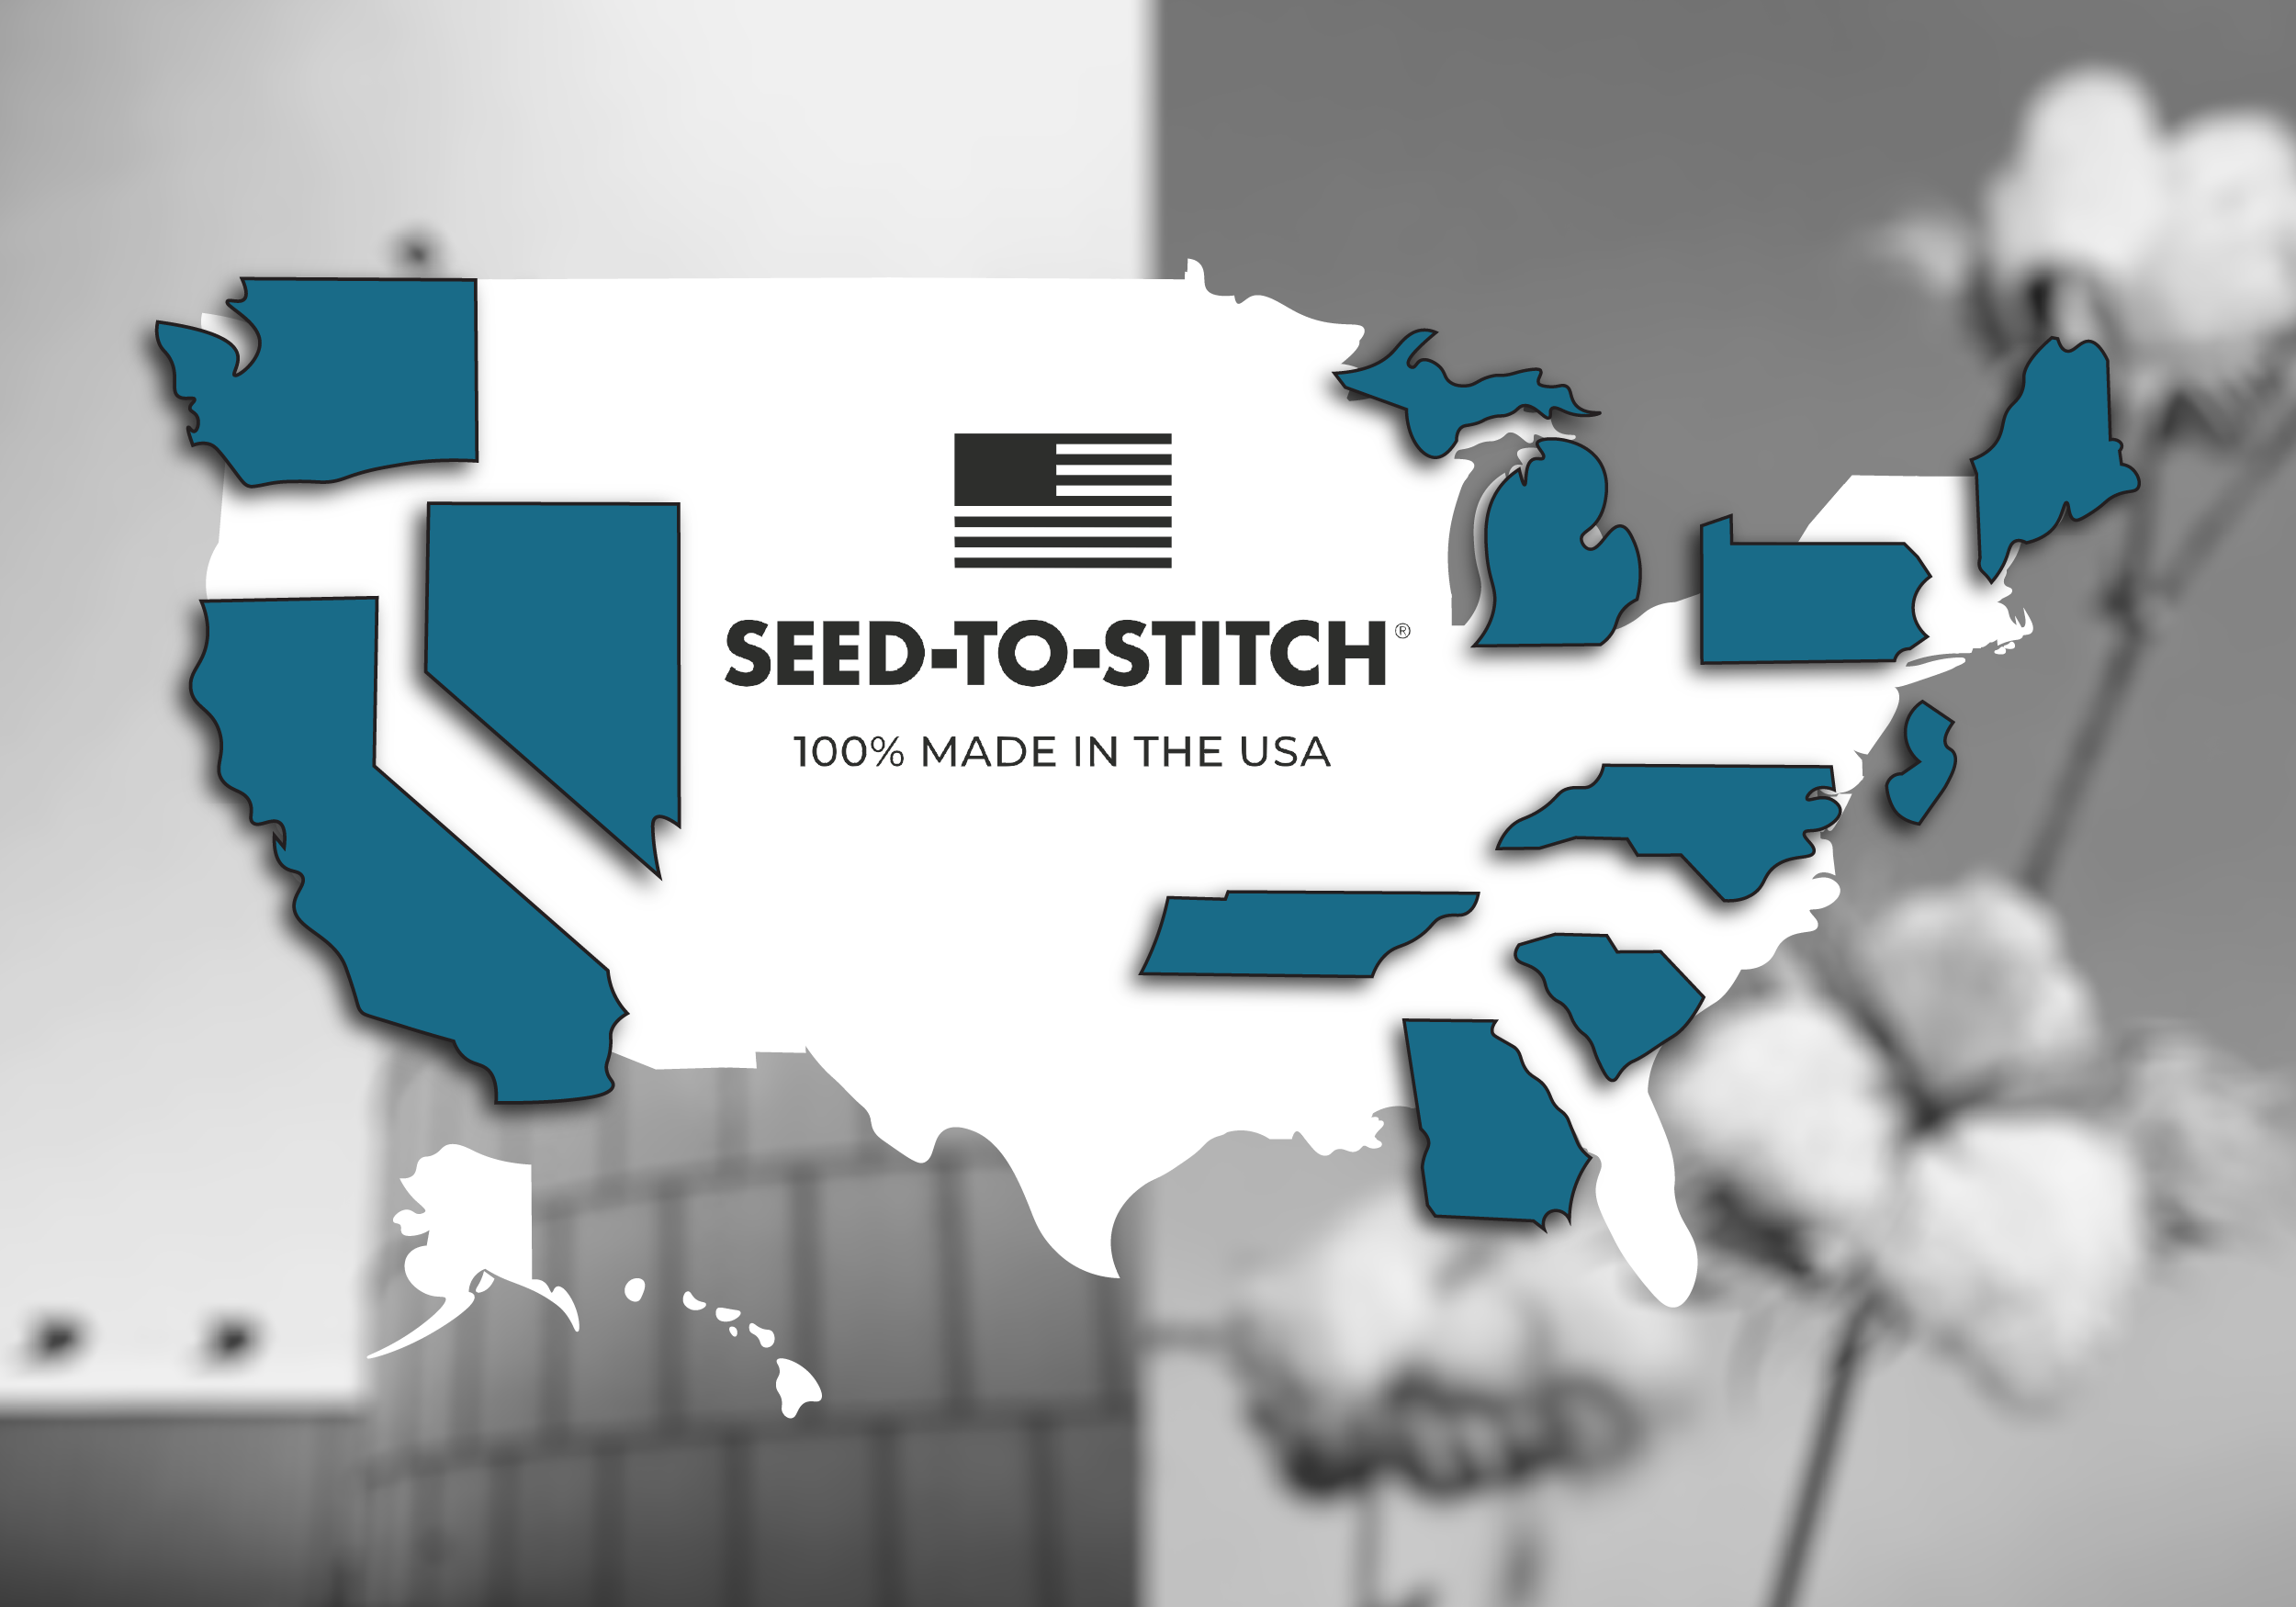 Map of the United States overlayed over an image of a building and an image of cotton. All states are white, except for Washington, California, Nevada, Michigan, Tennessee, Georgia, North Carolina, South Carolina, New Jersey, Pennsylvania, and Maine, which are all blue. The map also reads "Seed-to-Stitch® 100% Made in the USA".